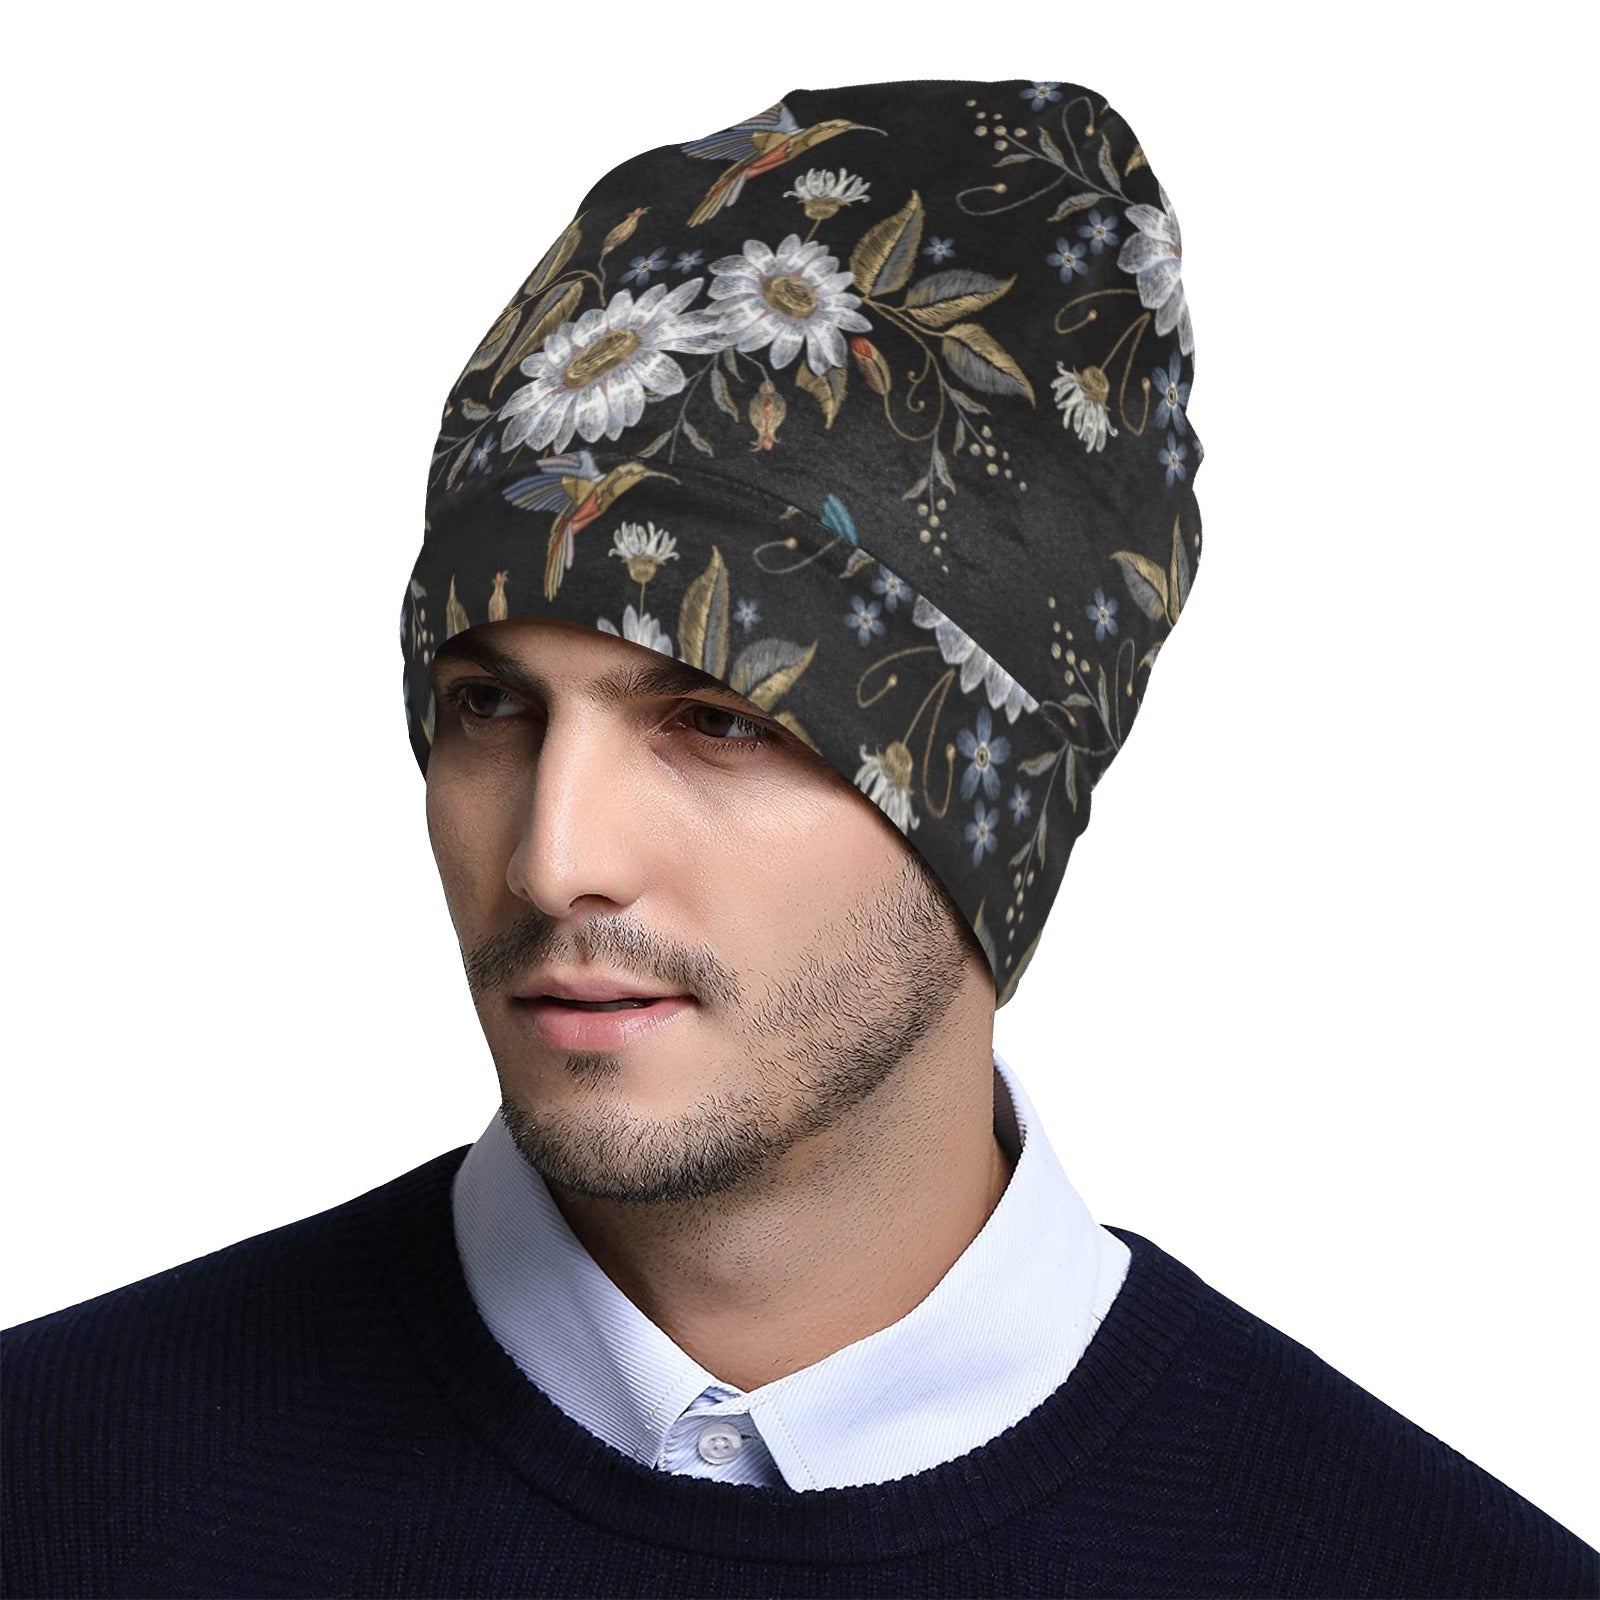 Hummingbird with Embroidery Themed Print Unisex Beanie